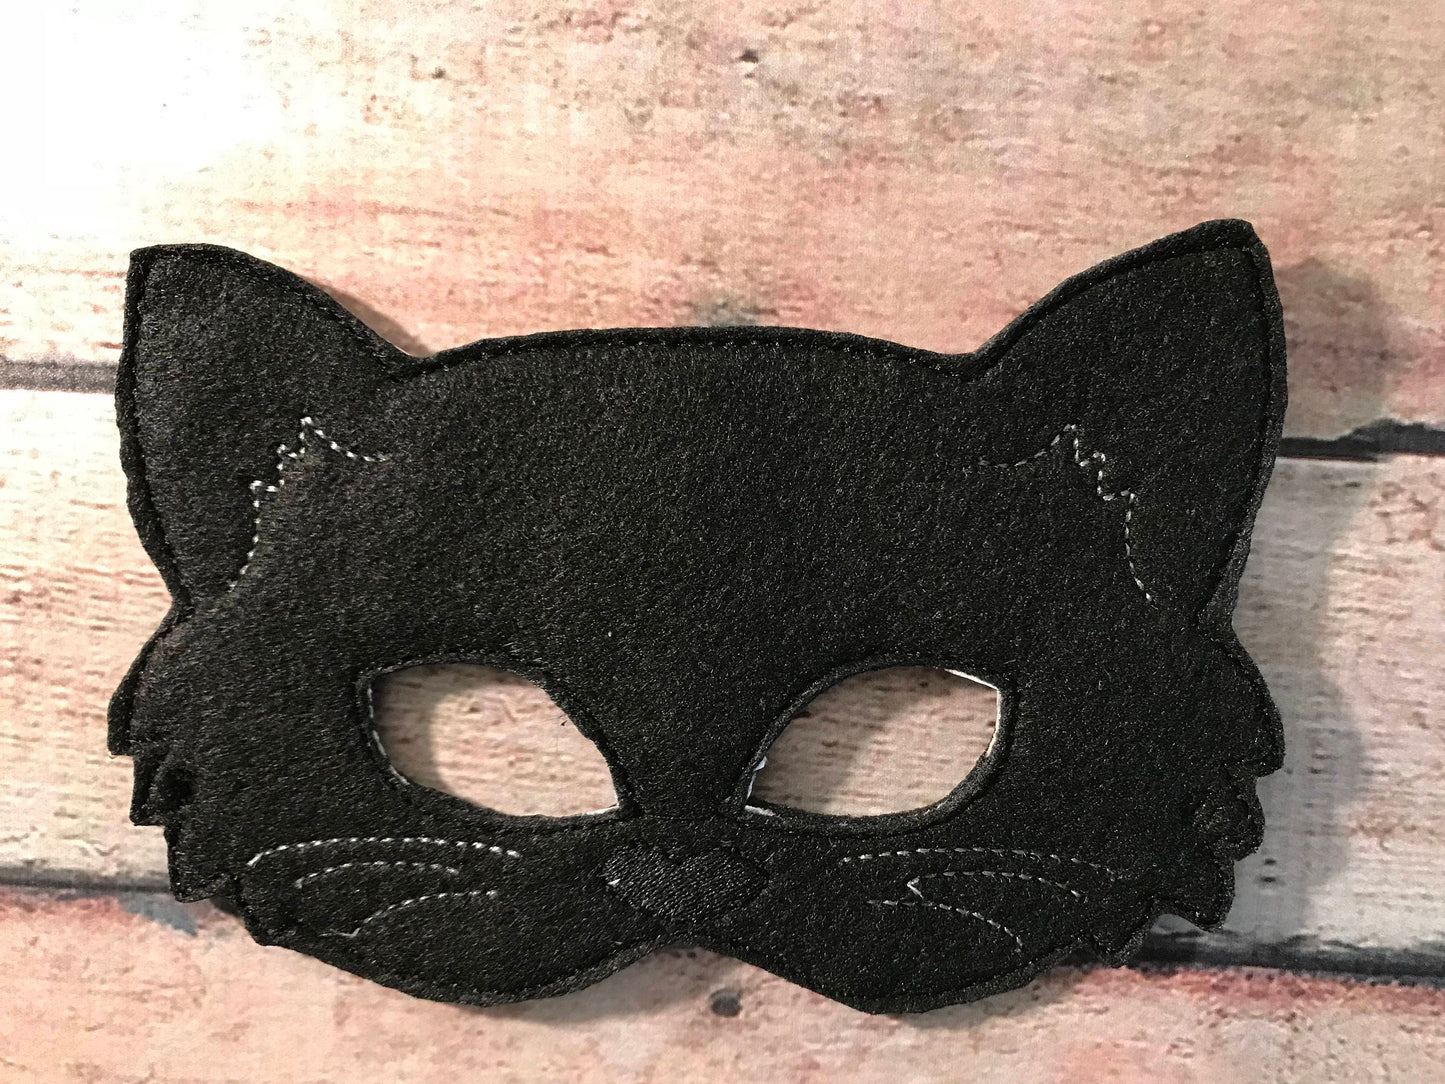 Handcrafted Nothing superstitious about this felt pretend play black cat mask for kids